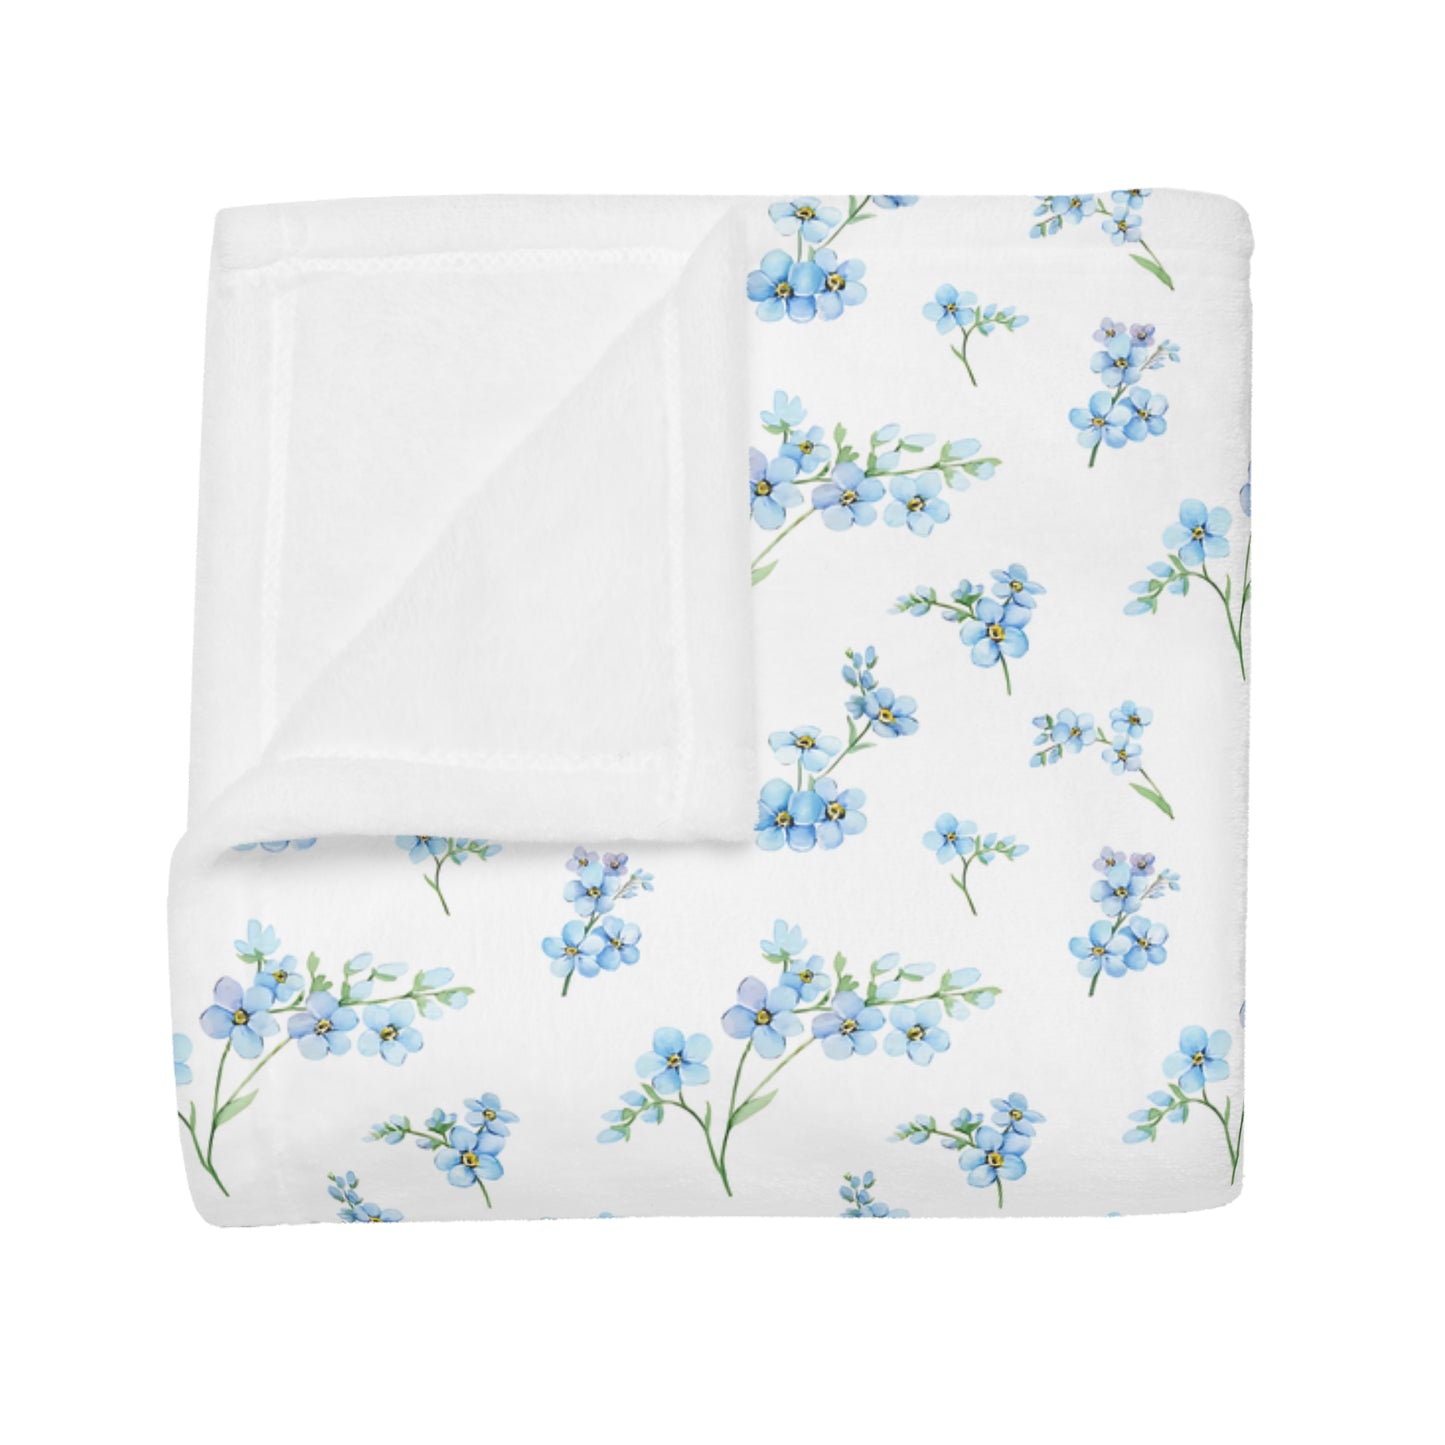 Forget-Me-Not Blanket